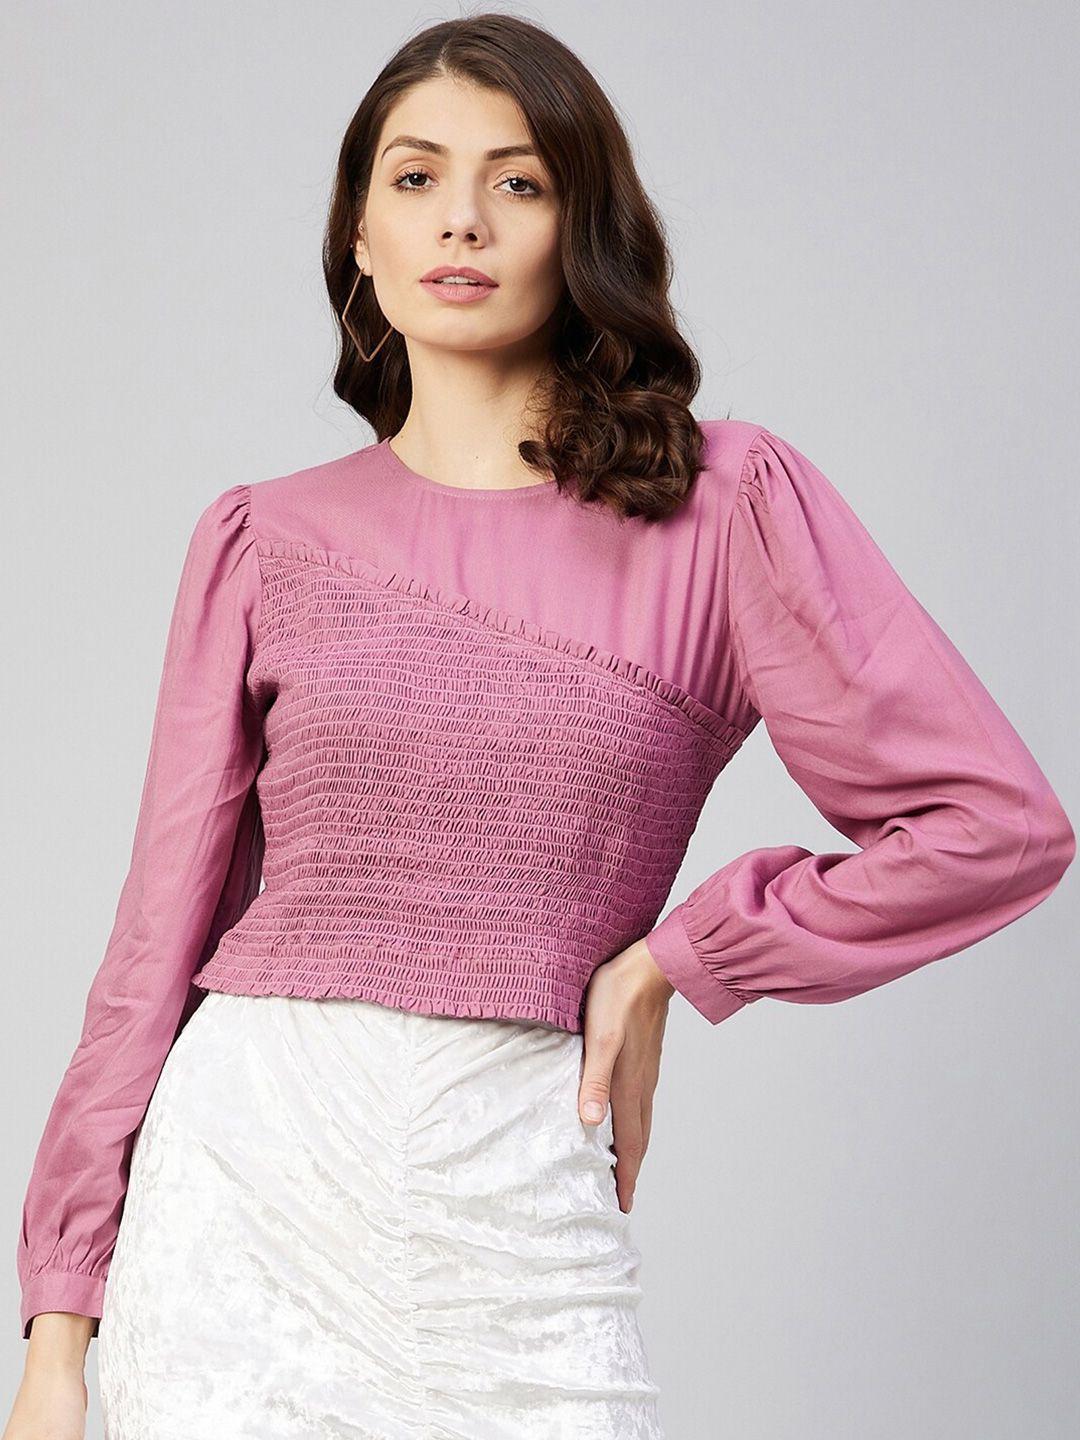 Marie Claire Mauve Solid Crop Top With Smocking